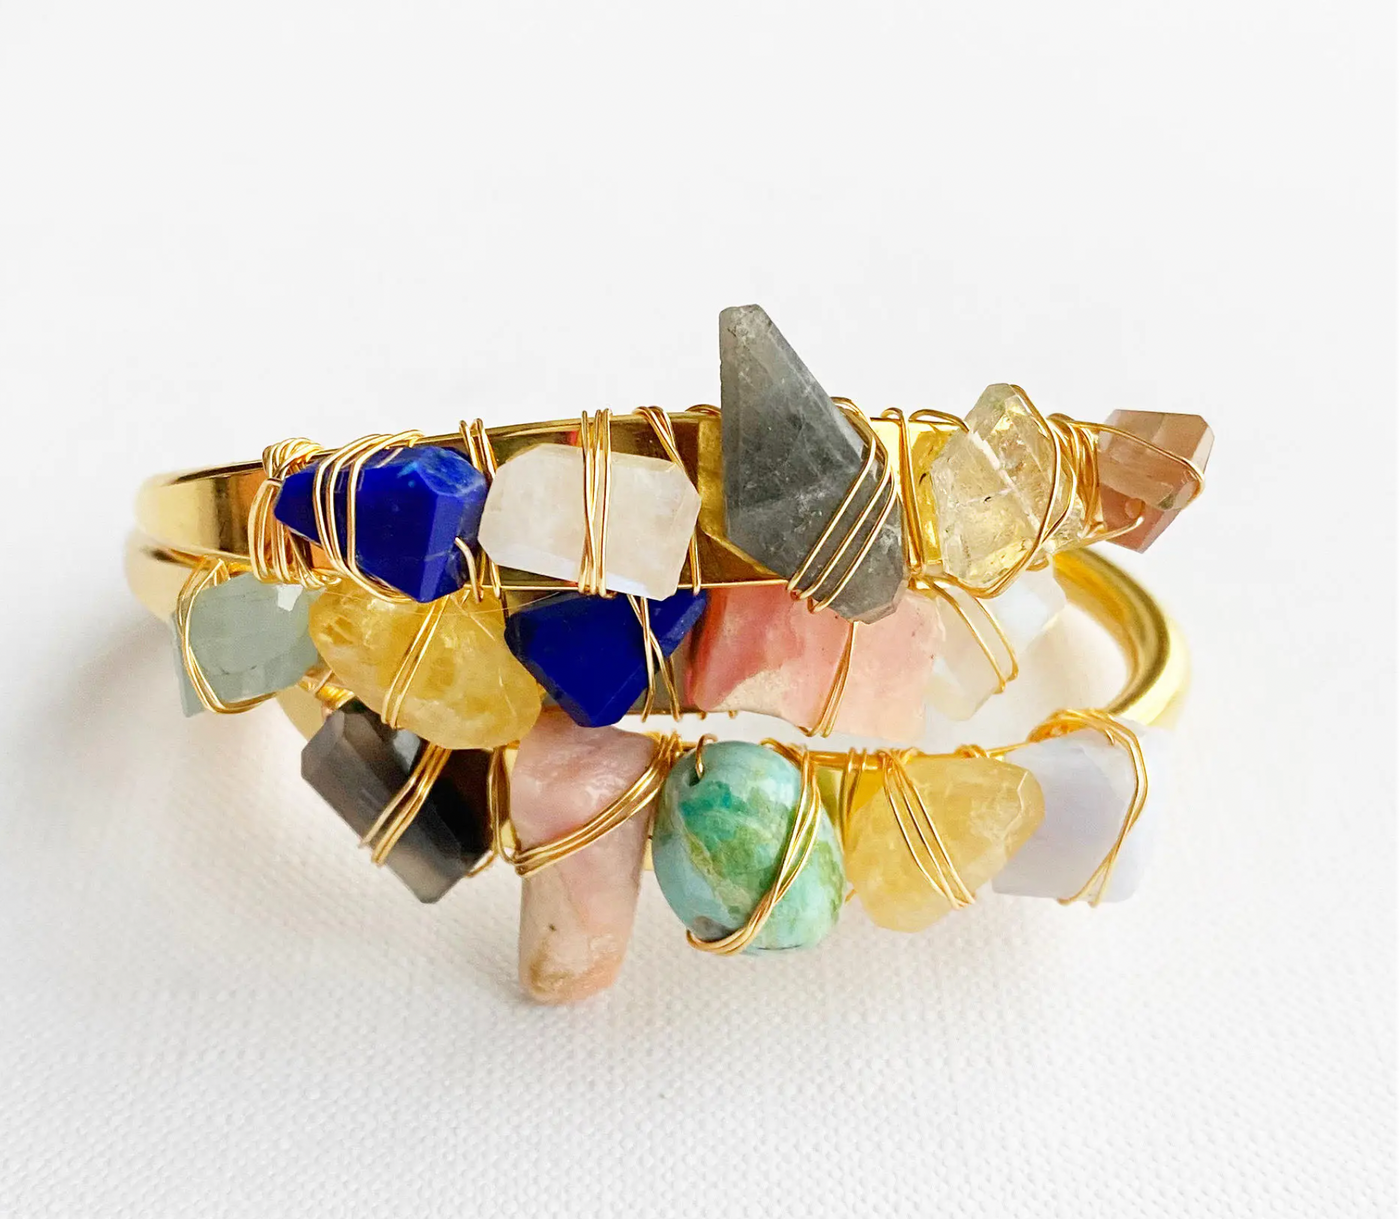 Crystal Alignment Cuff Bracelet - Assorted Stones